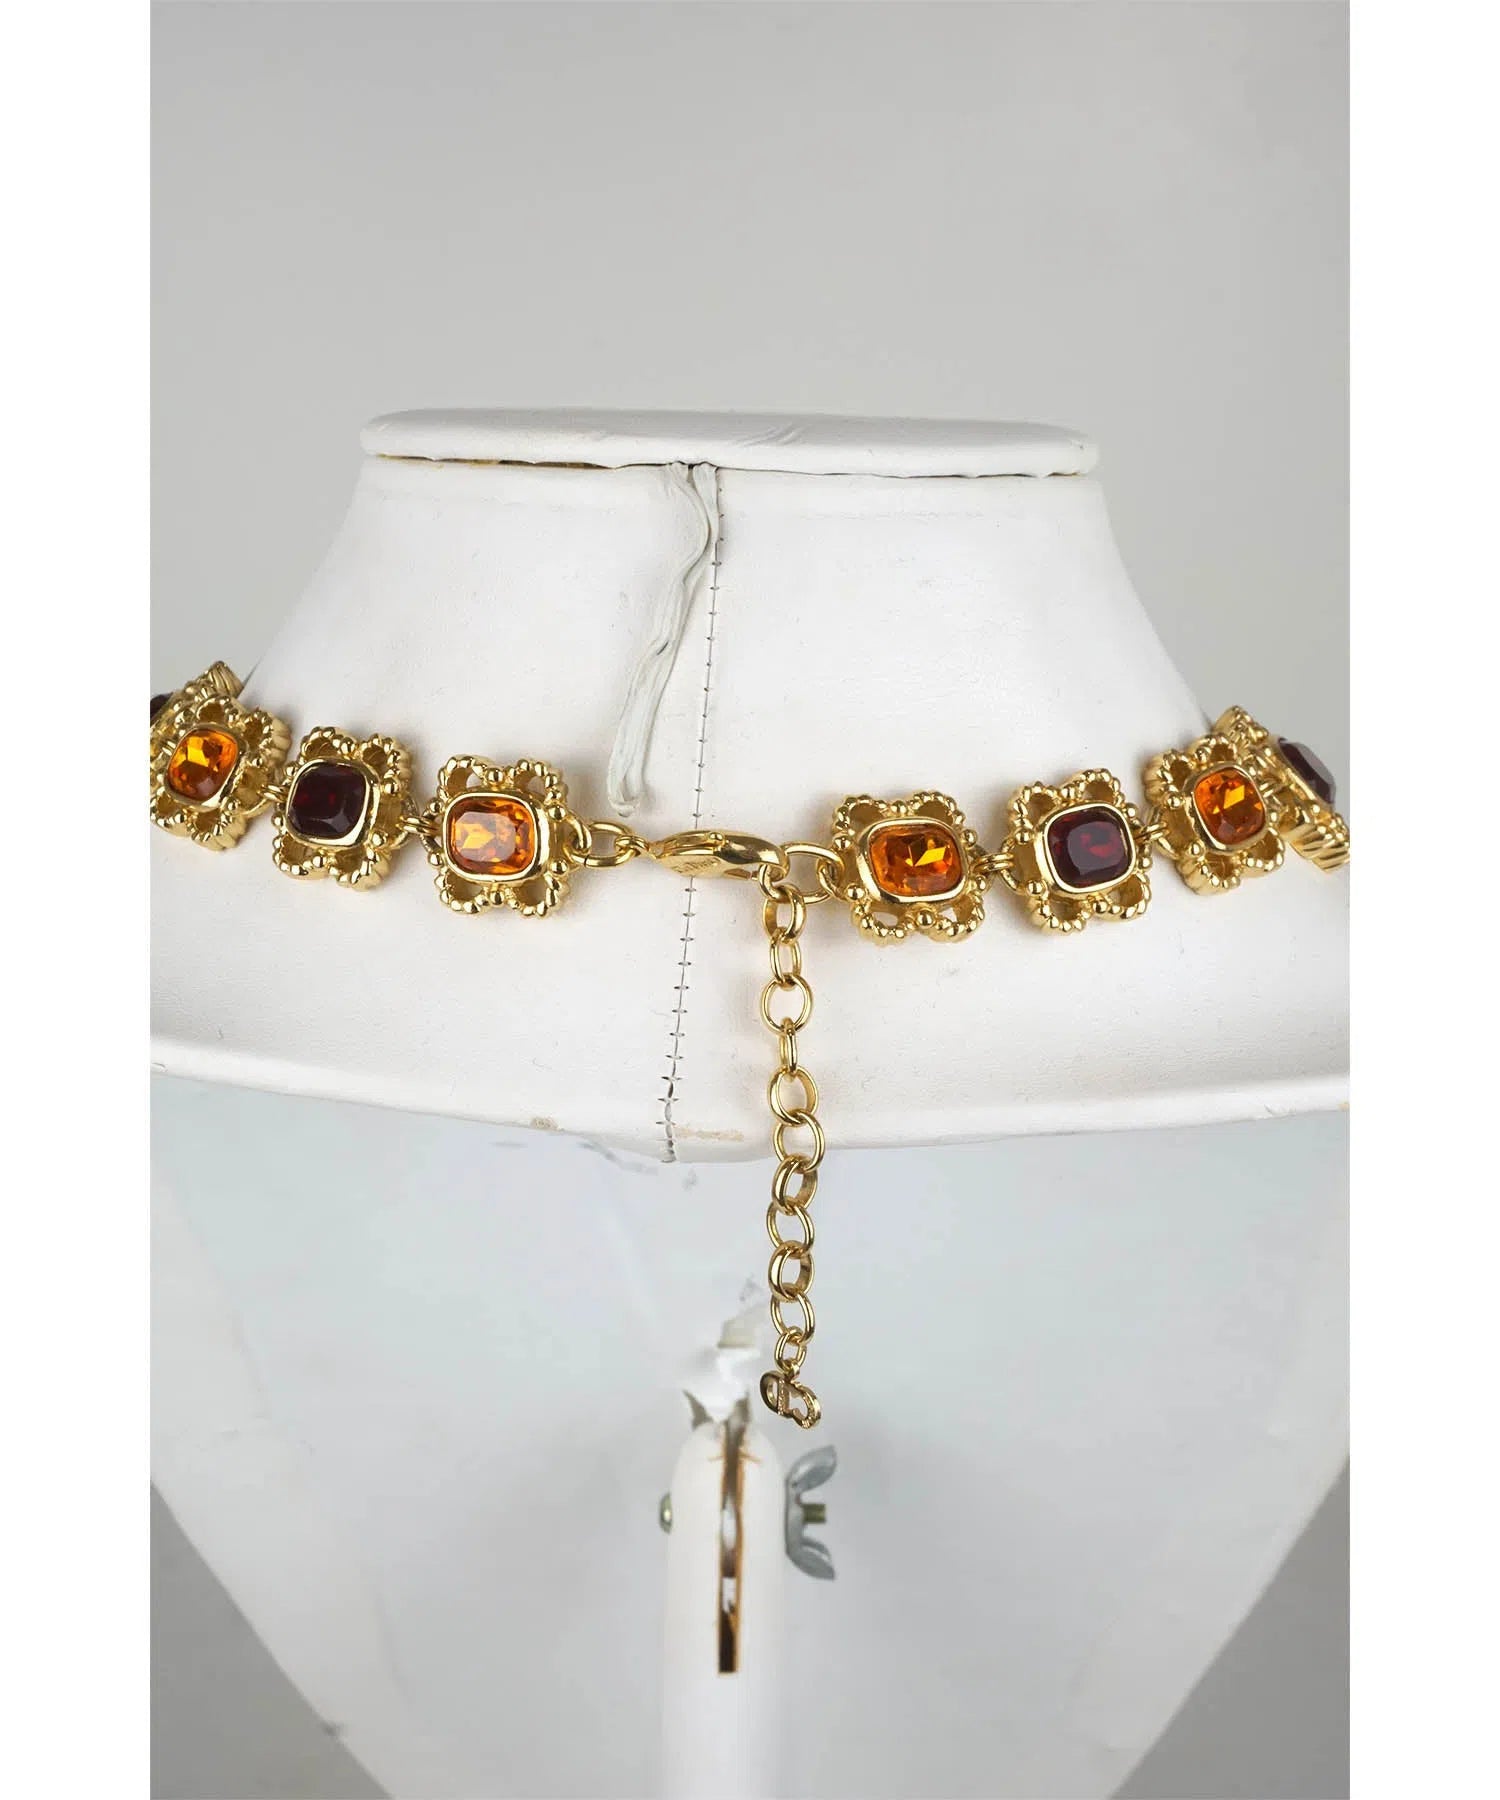 Christian Dior Rare Vintage Crystal Embellished Necklace 1960's-1970's - Foxy Couture Carmel